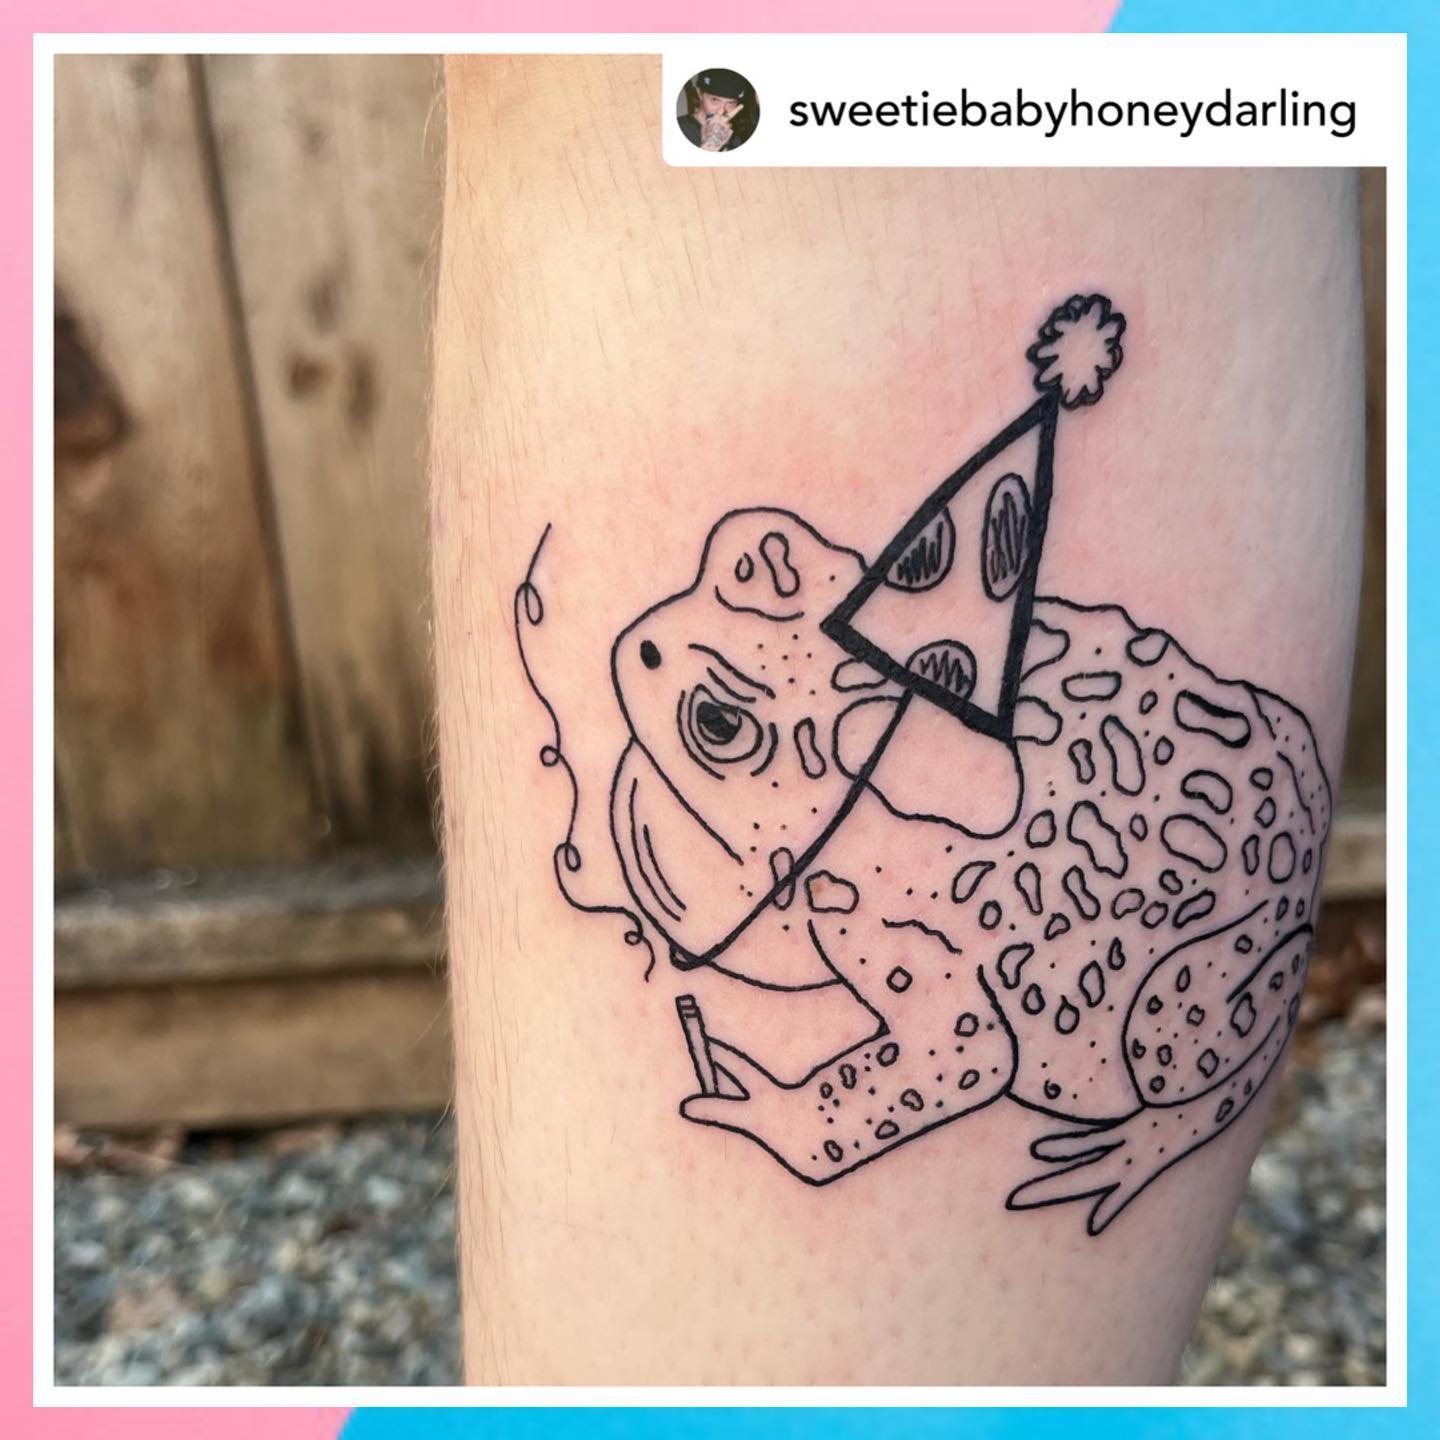 Tattoo by @sweetiebabyhoneydarling DM them directly to book time.